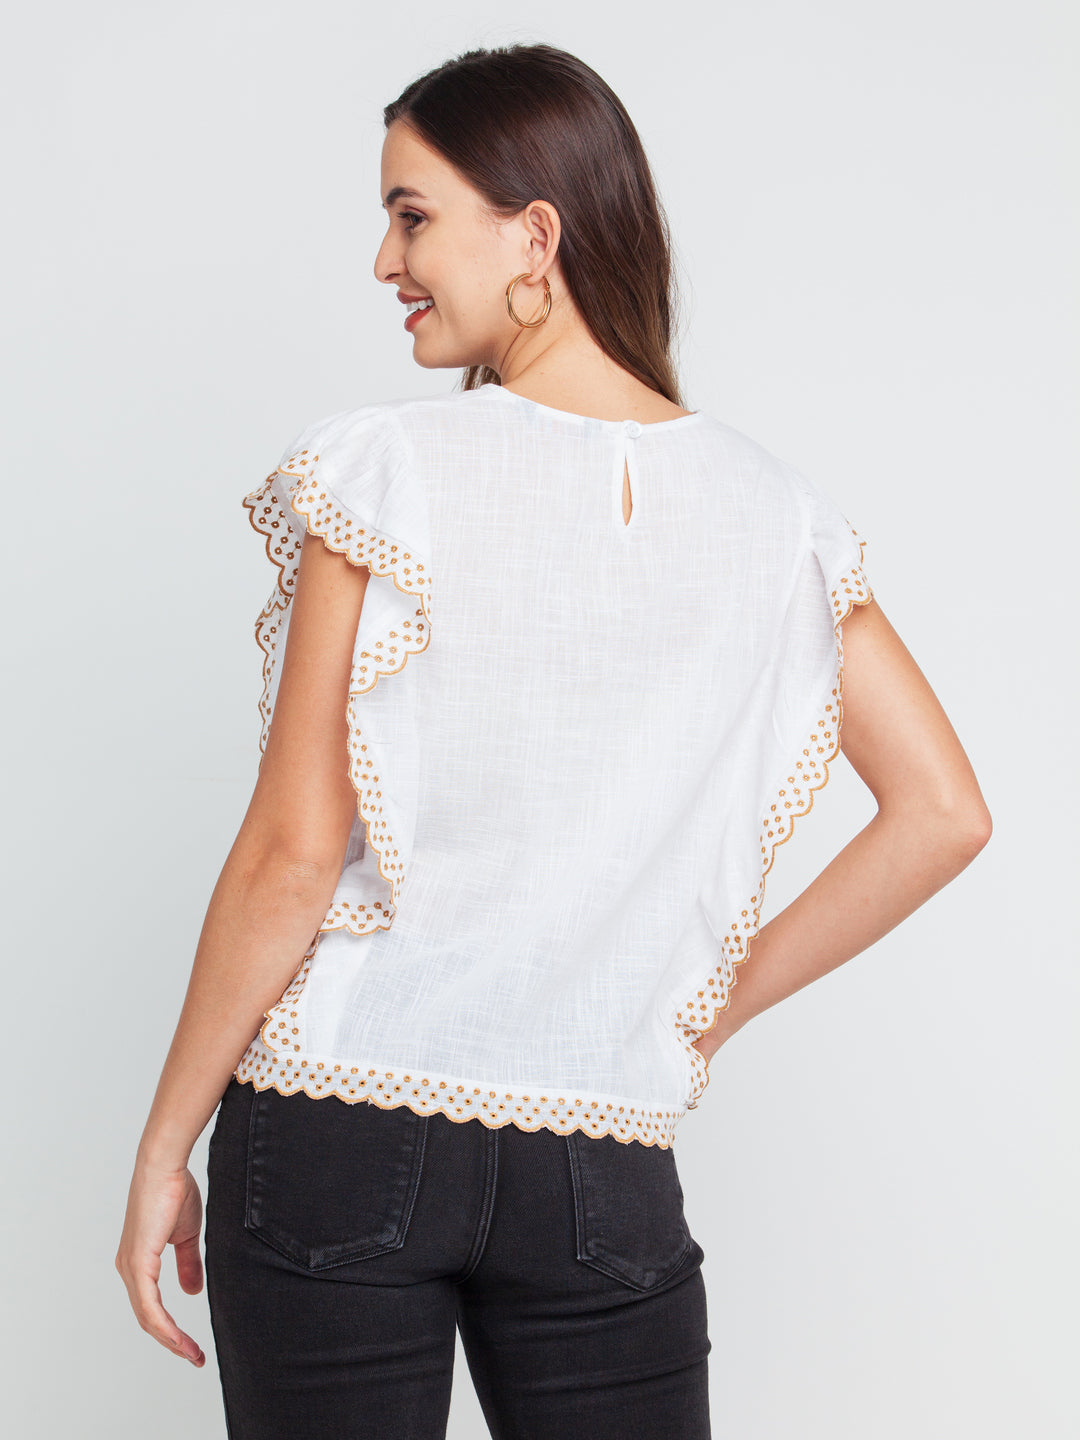 White Embroidered Regular Top For Women